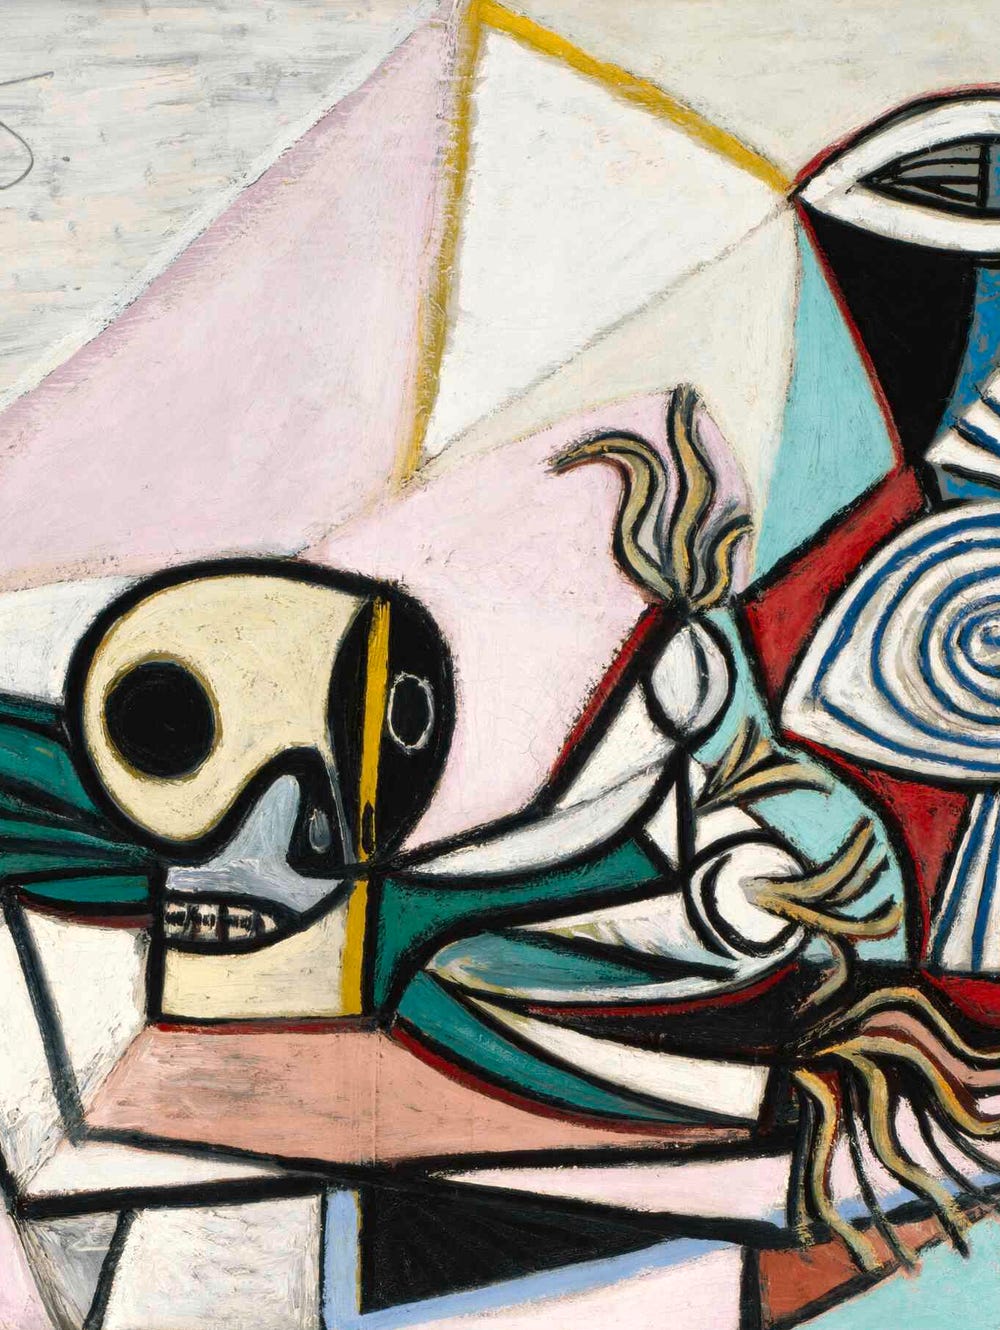 Abstract artwork by Picasso with skulls, leeks, and pitcher